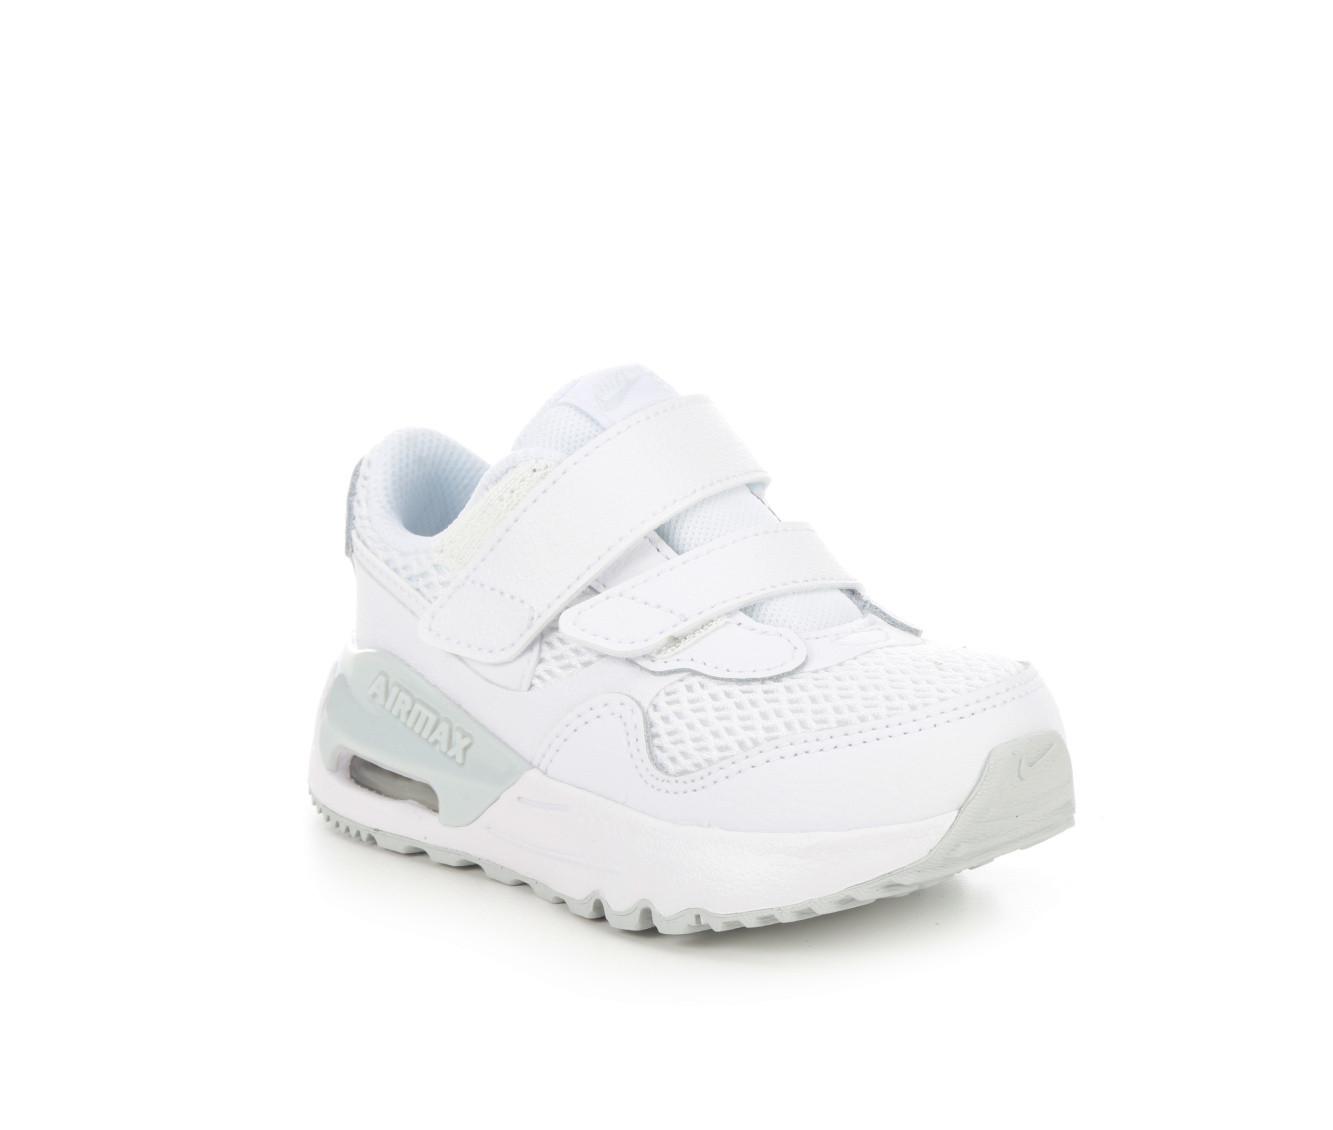 Boys' Nike Toddler Air Max SYSTM Running Shoes